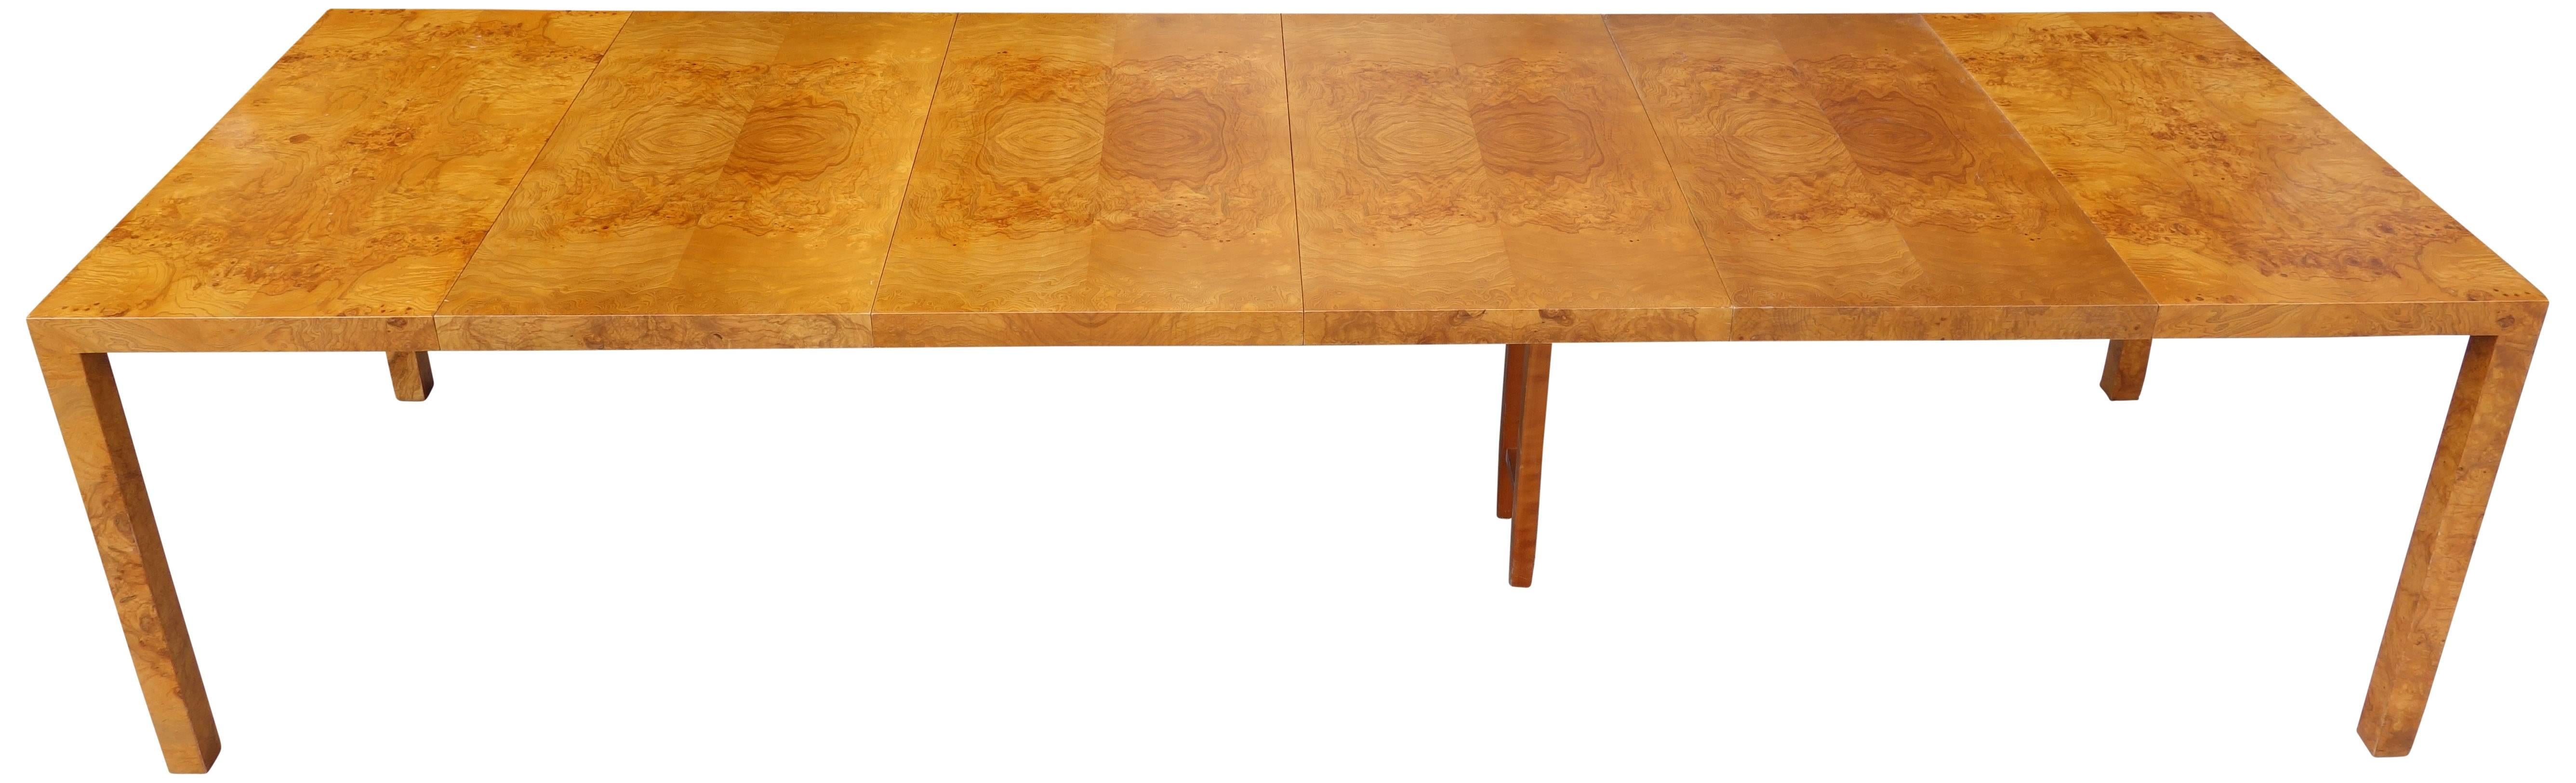 Exceptional highly figured burl wood Parsons style table by Milo Baughman for Directional.
Expands from 39'' to an astounding 123''.